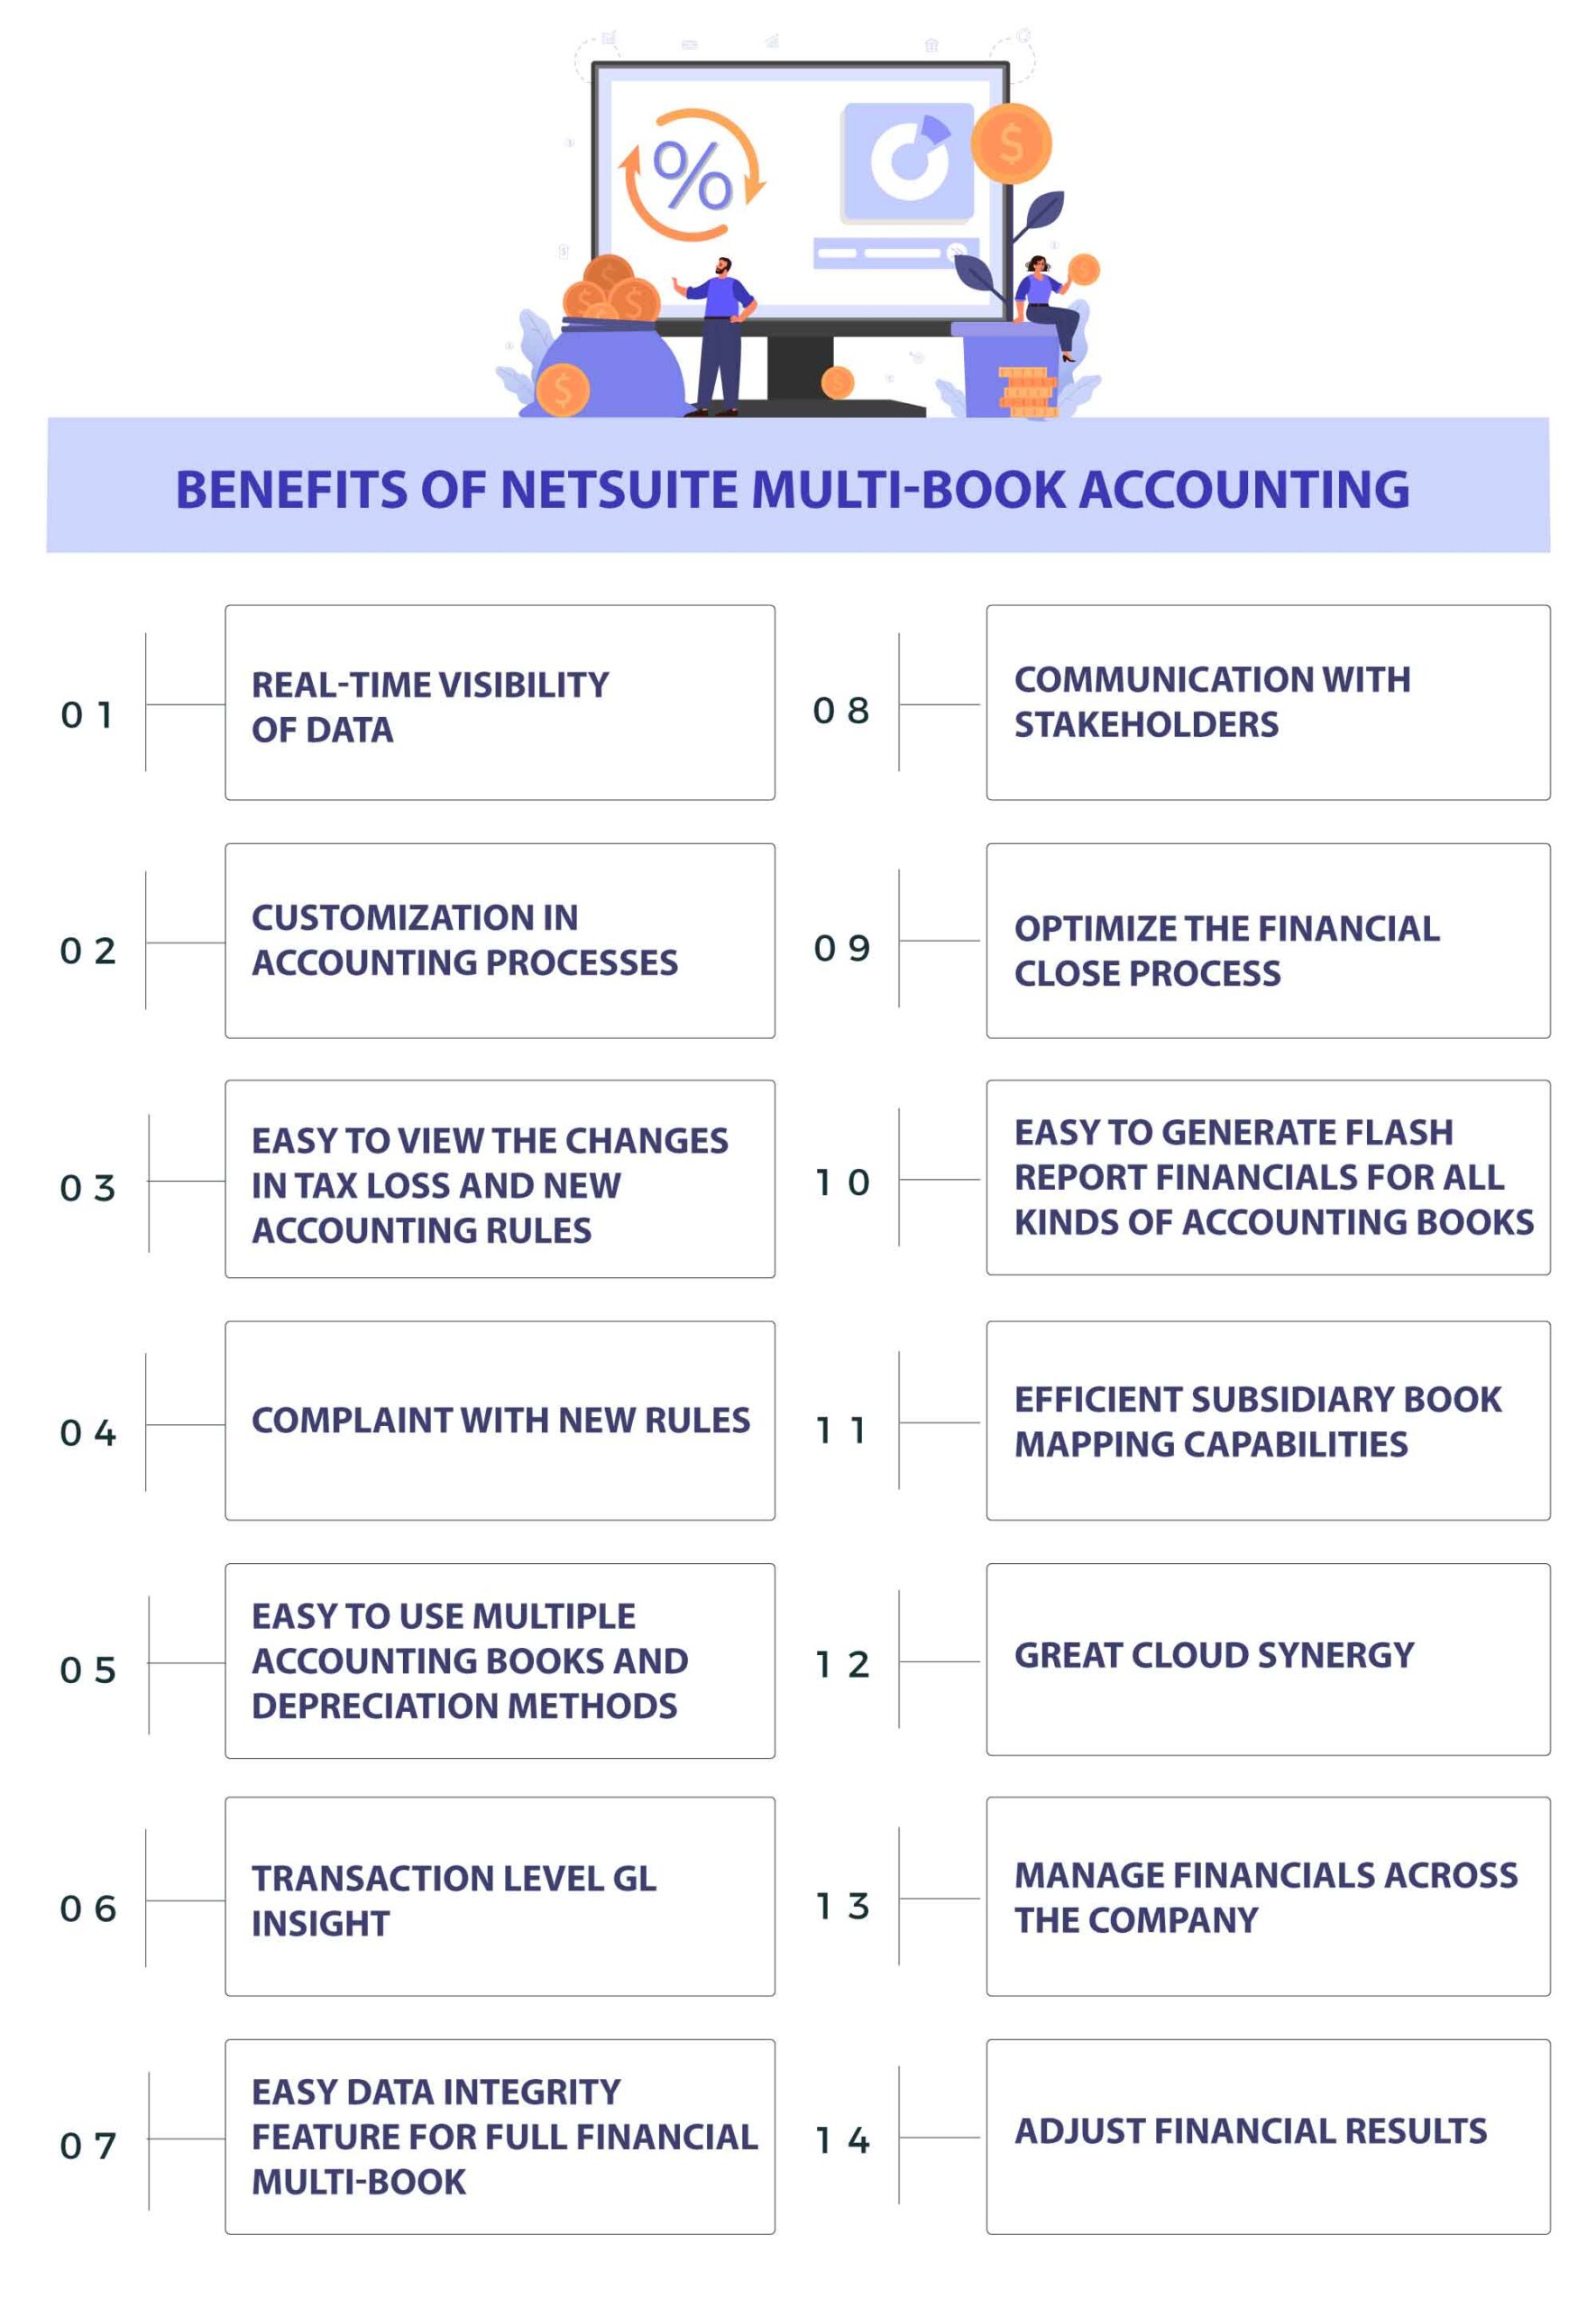 Benefits Of NetSuite Multi-book accounting